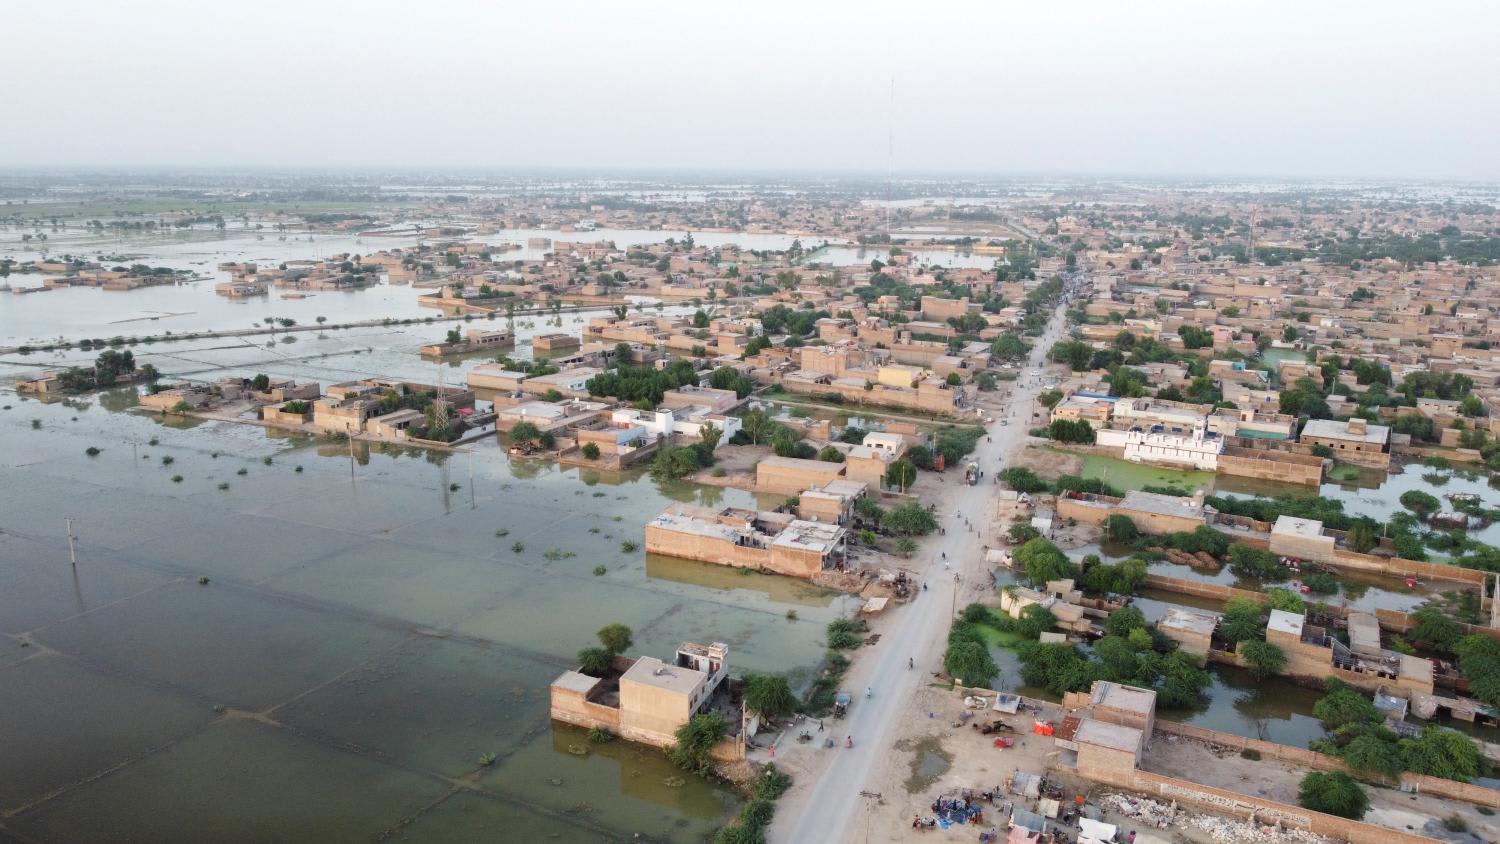 A view of the submerged houses, following rains and floods during the monsoon season in Dera Allah Yar, Jafferabad District, Pakistan on Sept 5, 2022.